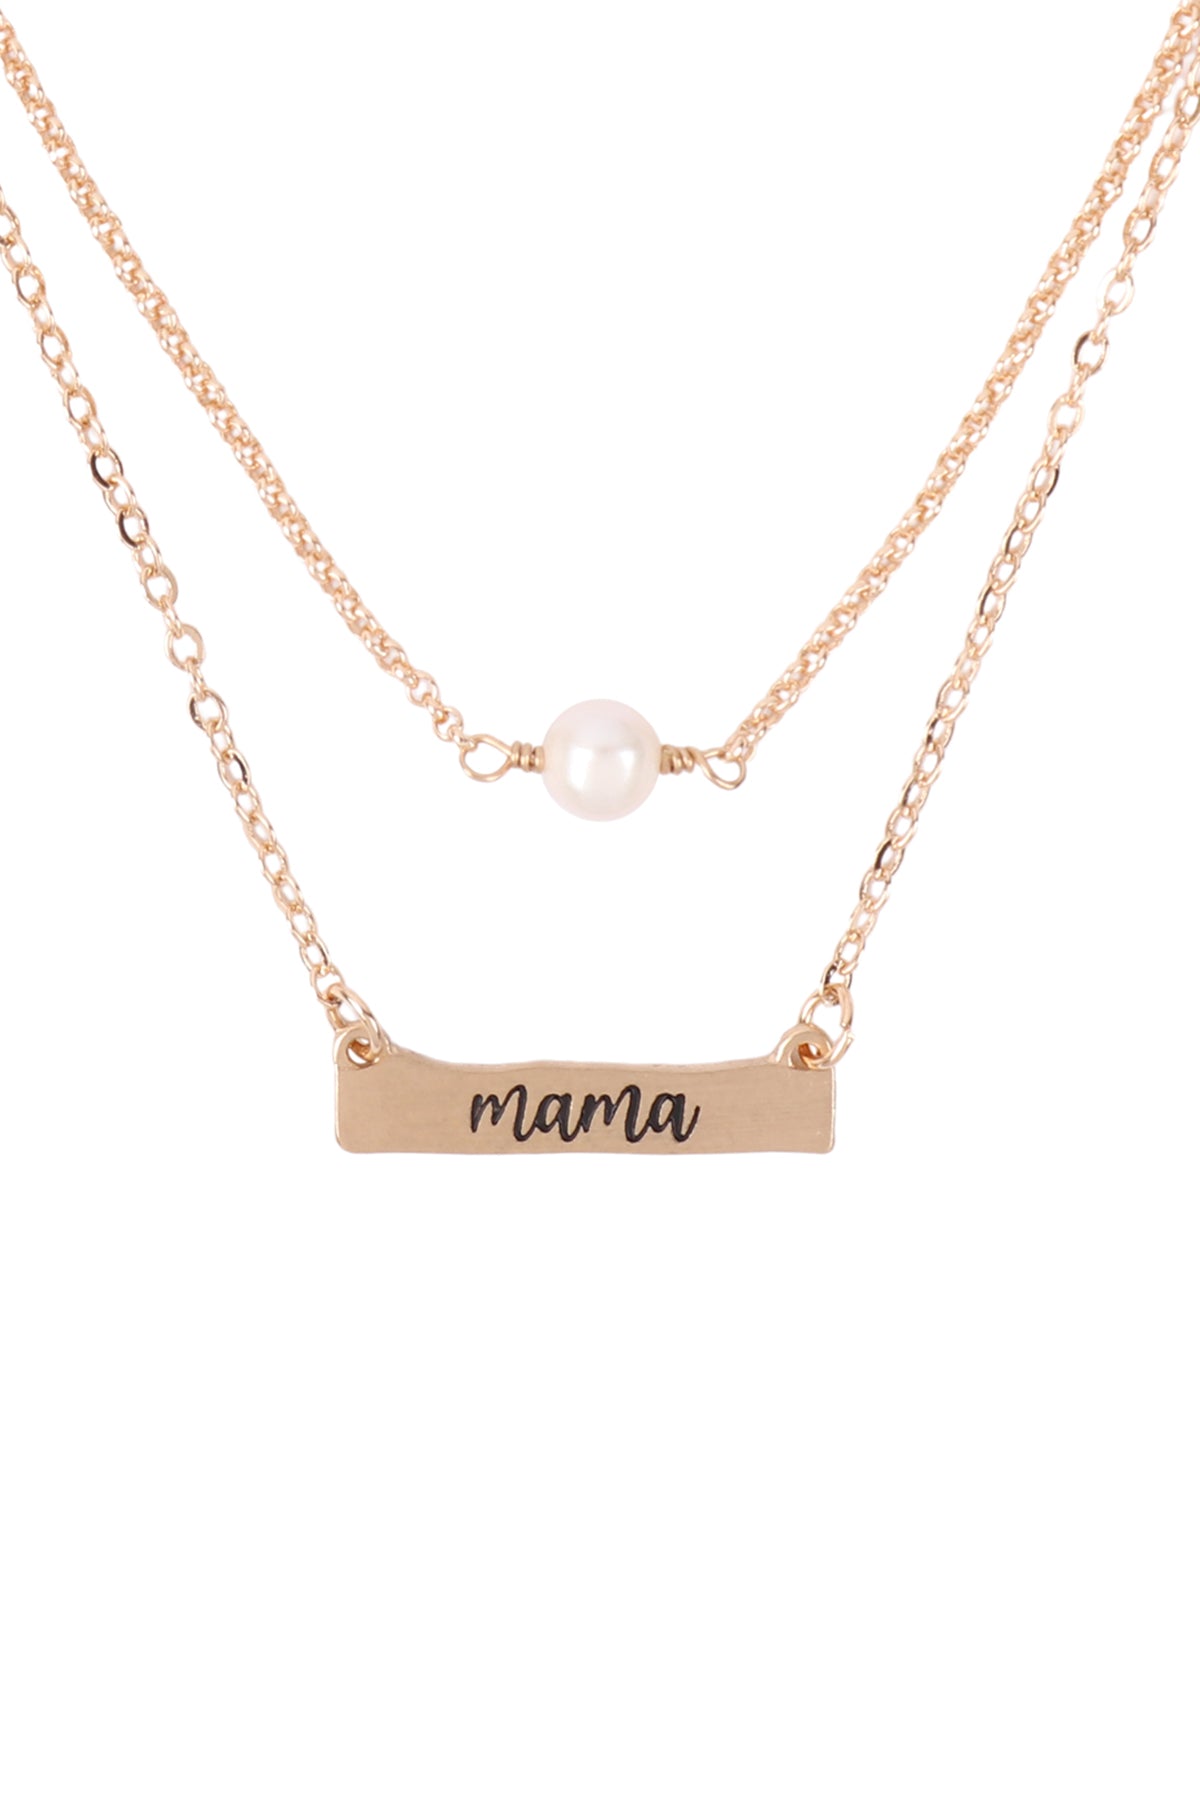 "MAMA" INSPIRATIONAL PEARL 3 SET NECKLACE